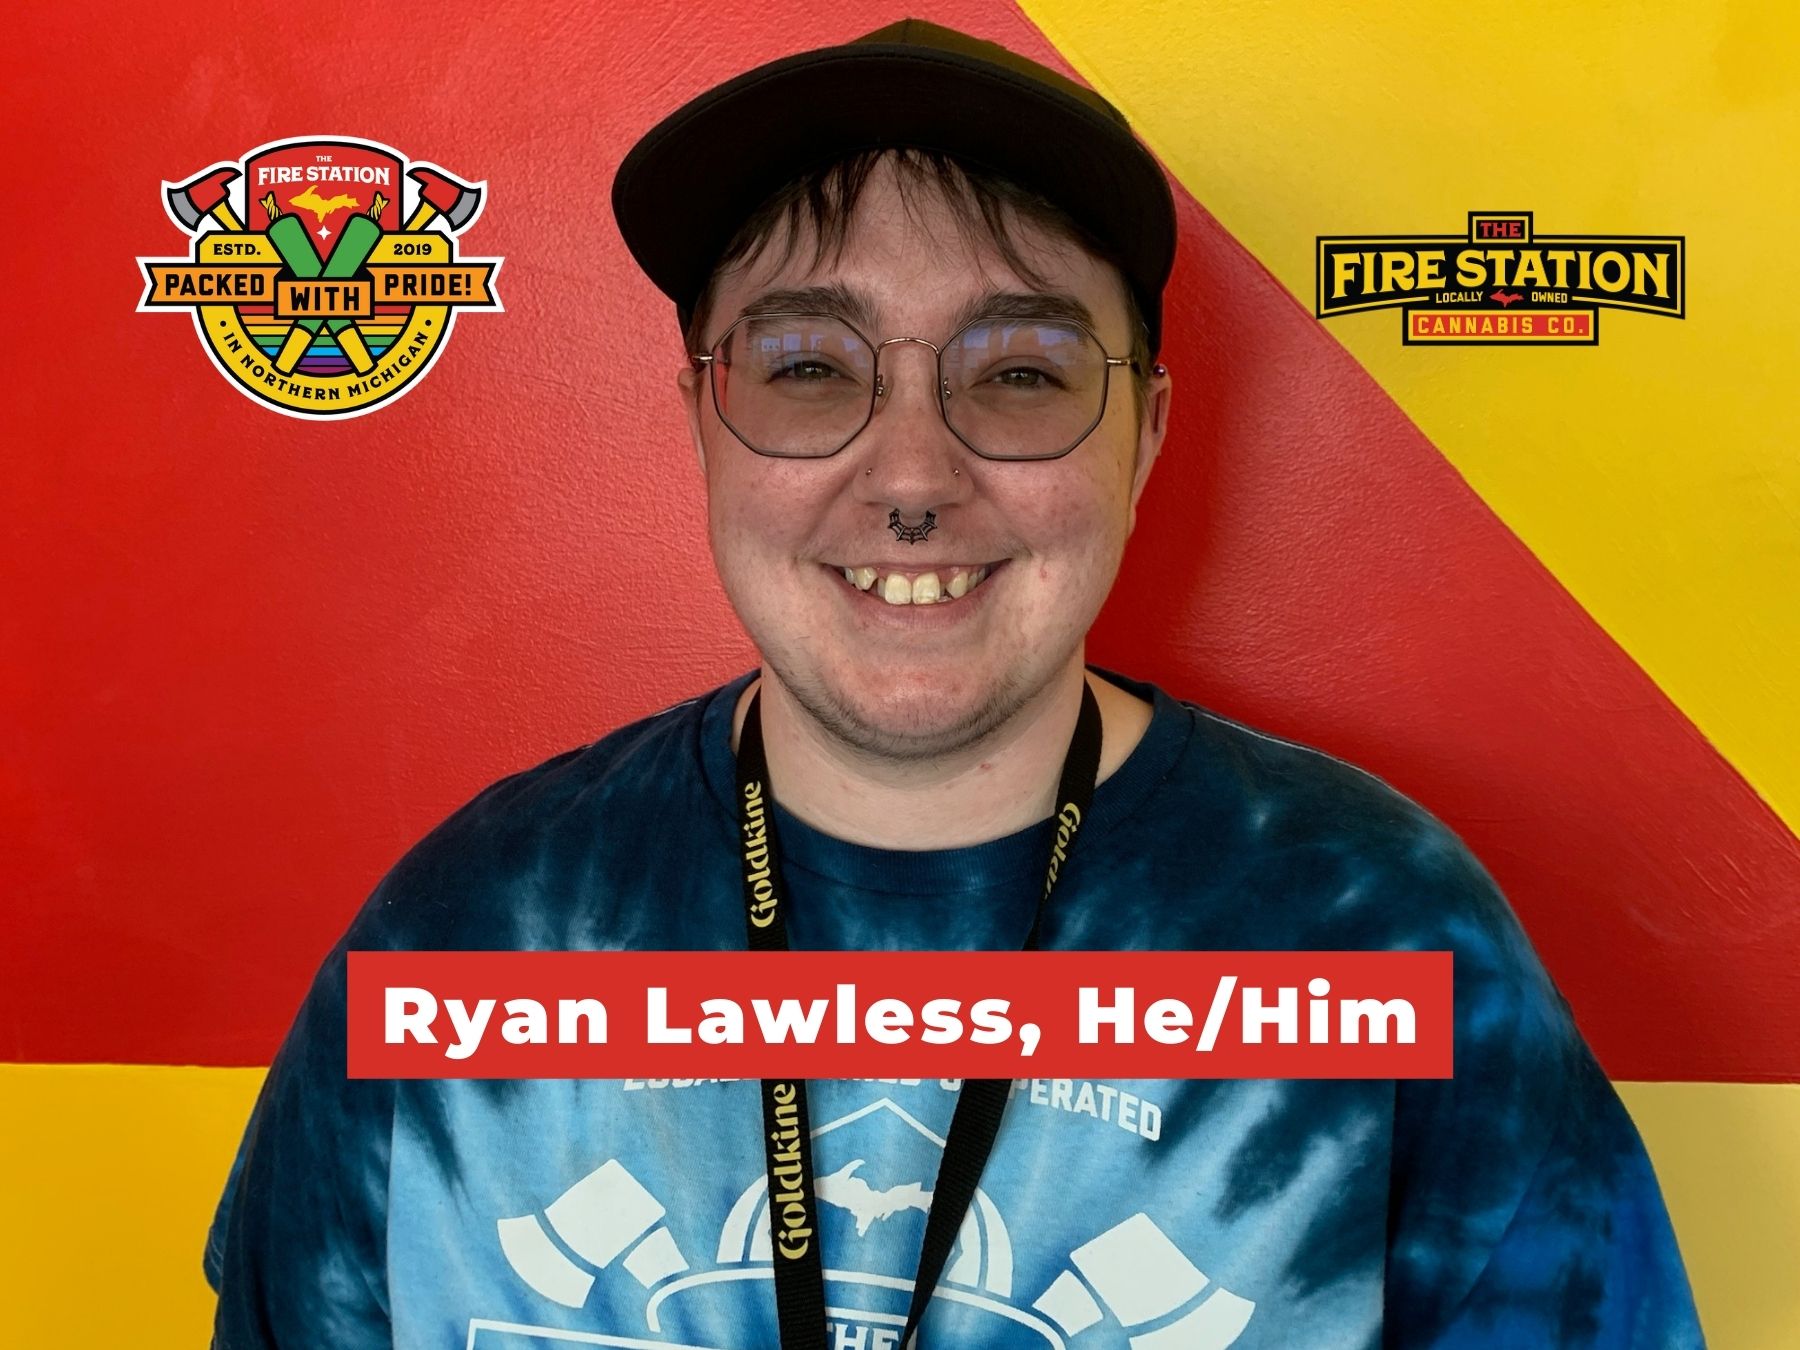 The Fire Station celebrates Pride Month and features Ryan Lawless He/Him, budtender at TFS Sault Ste. Marie